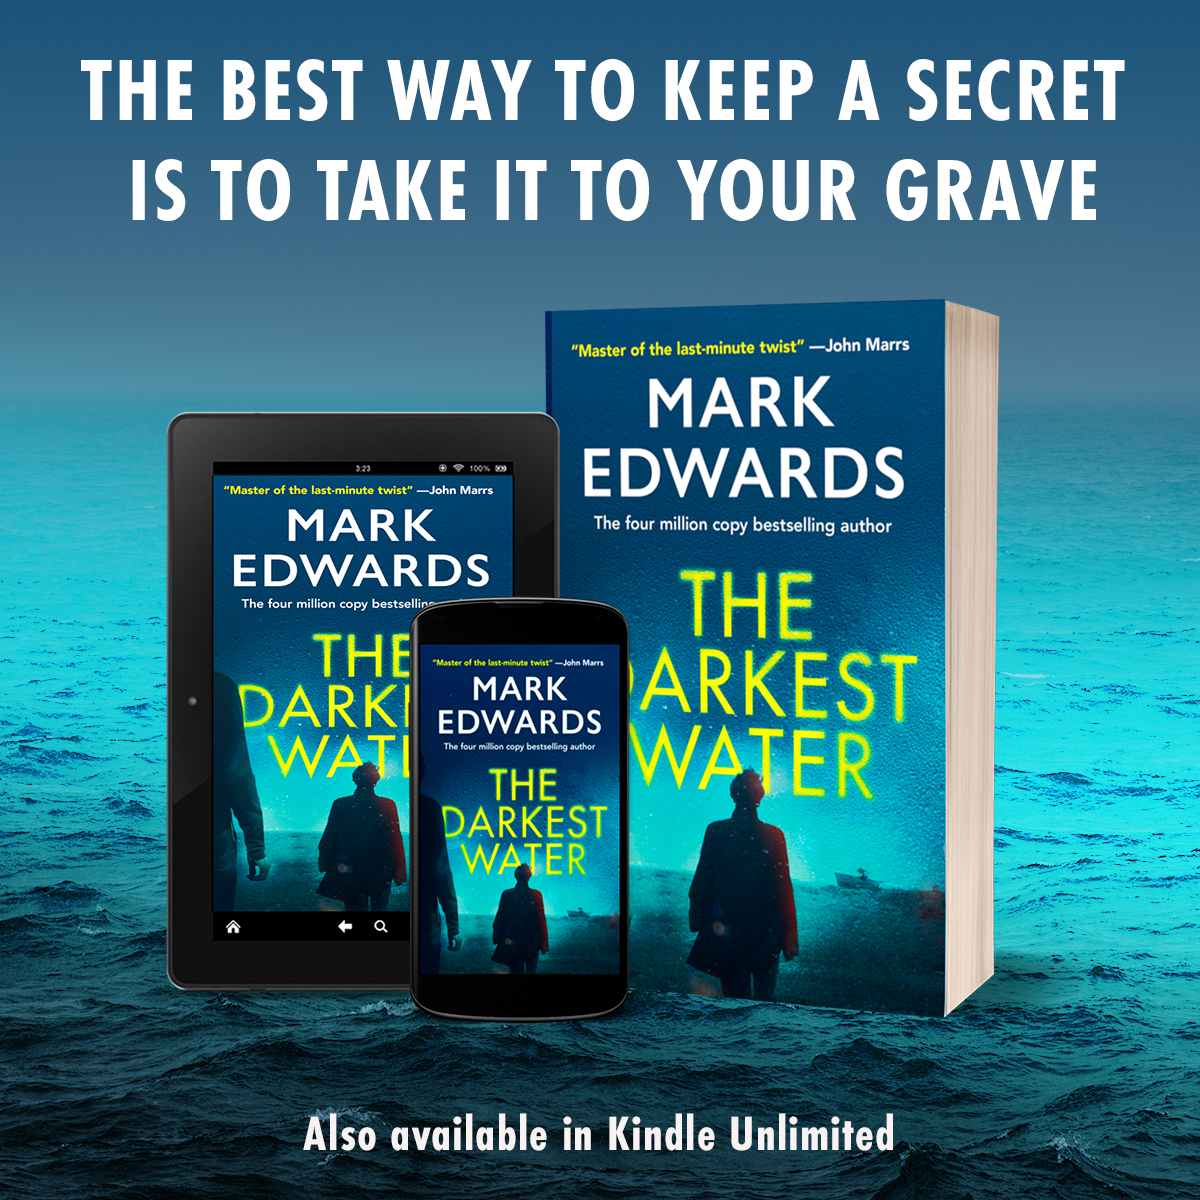 Yes, I've got another book out! THE DARKEST WATER is my 20th published novel and it's out today. A head found on a beach and a social media stalker. How do they connect? You'll have to read it... mybook.to/darkestwater RTs very welcome.